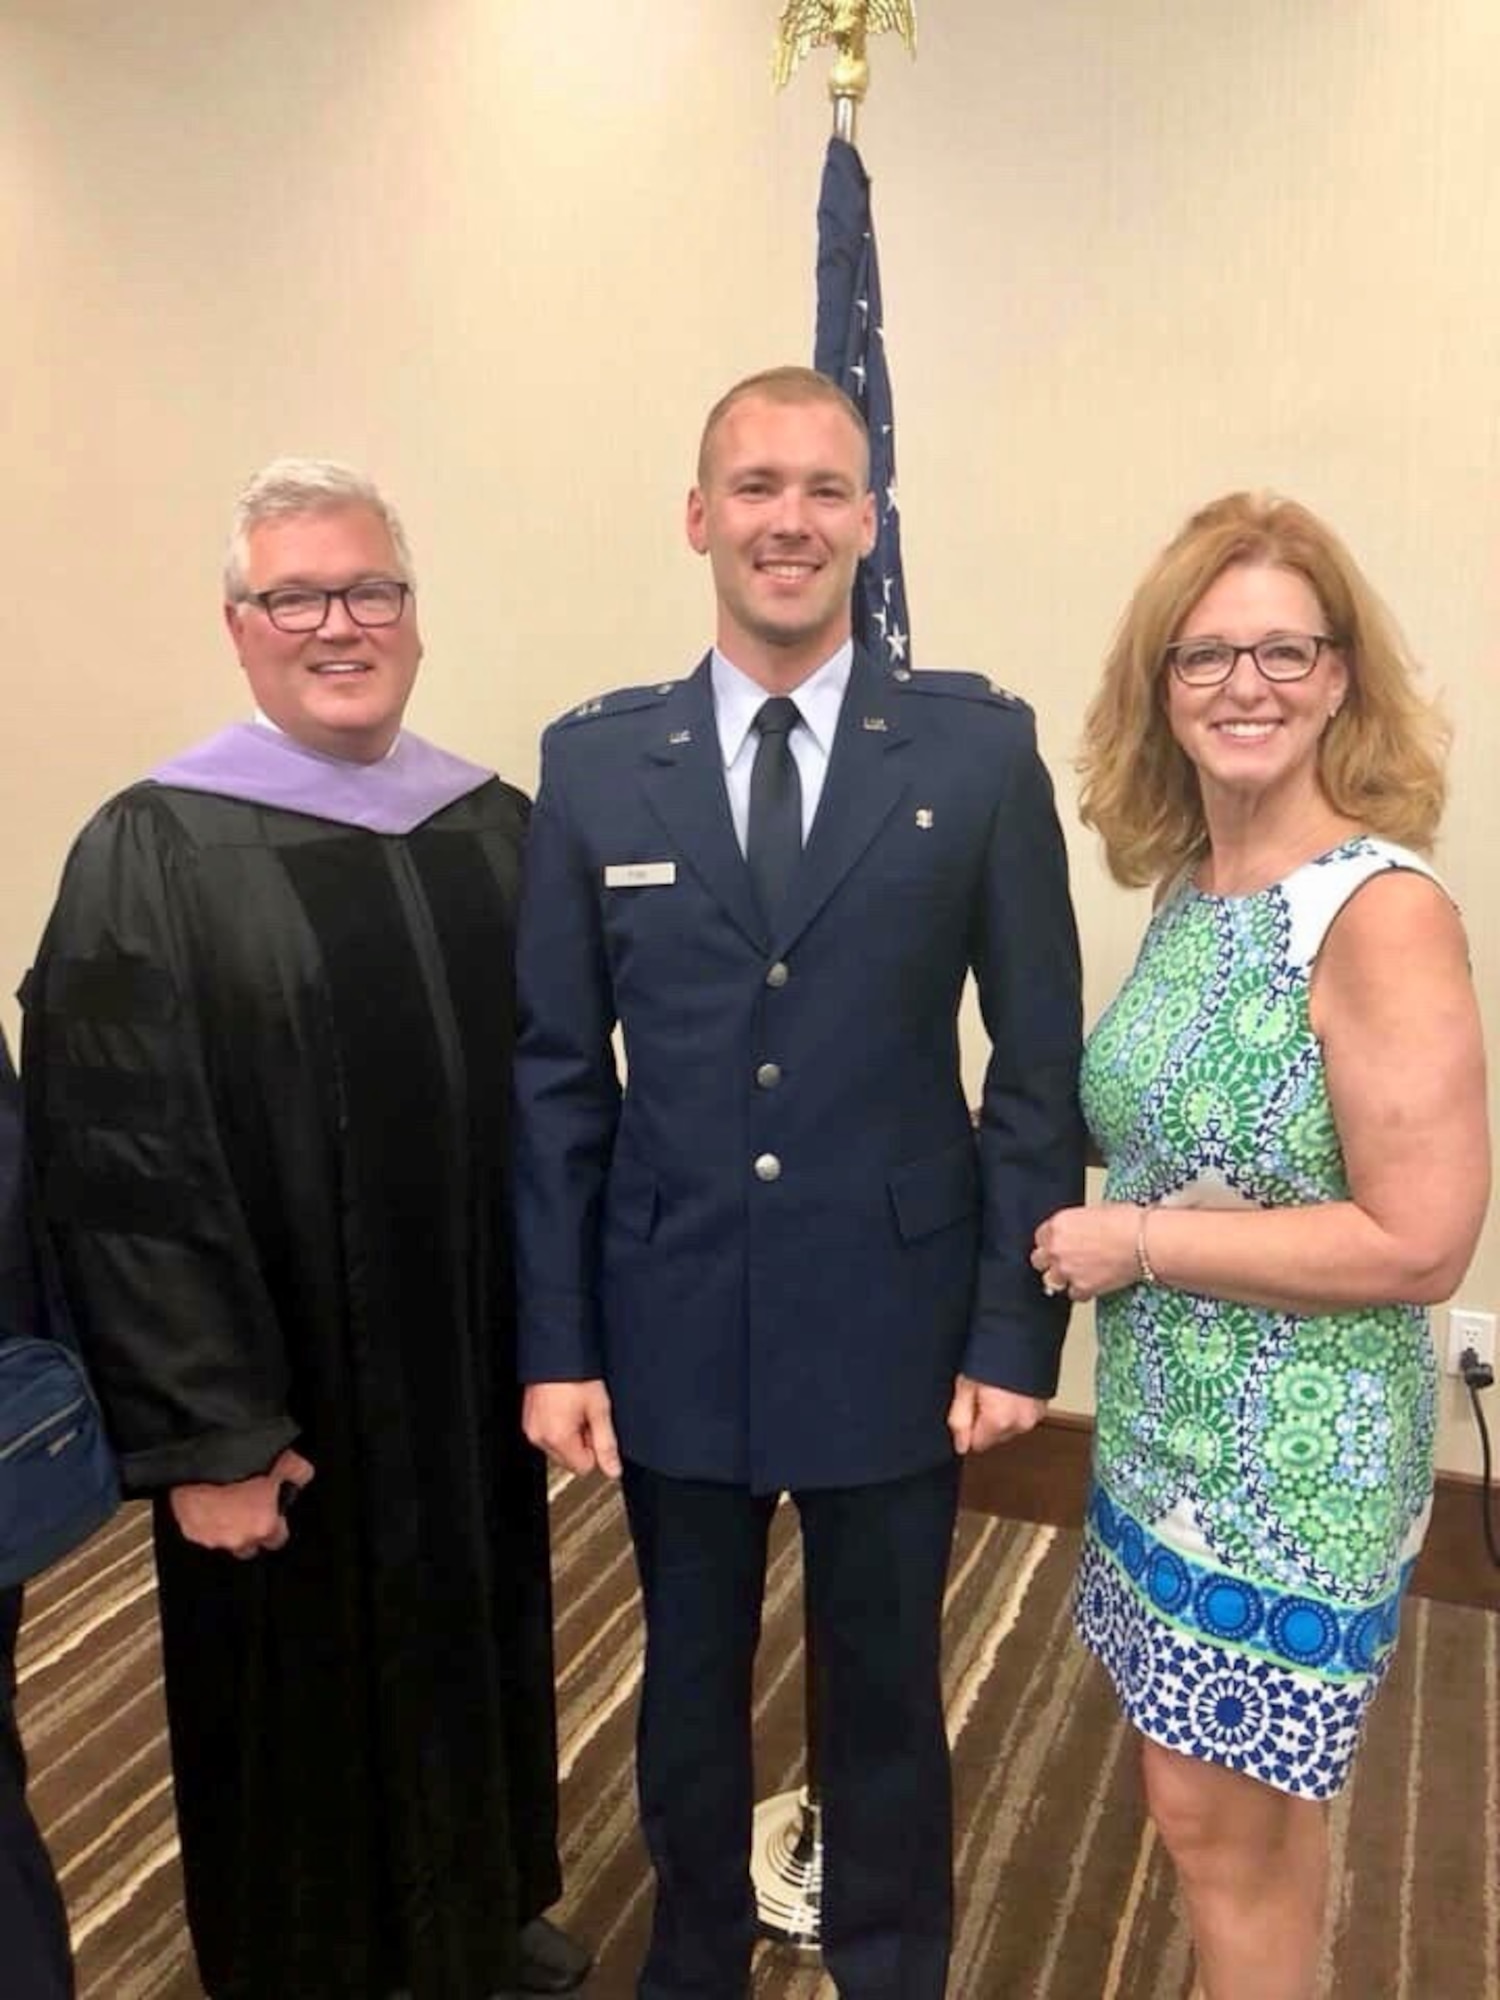 Dr. Richard Fink, Dr. Keane, and Rhonda Fink at his graduation and promotion ceremony. (Courtesy photo)